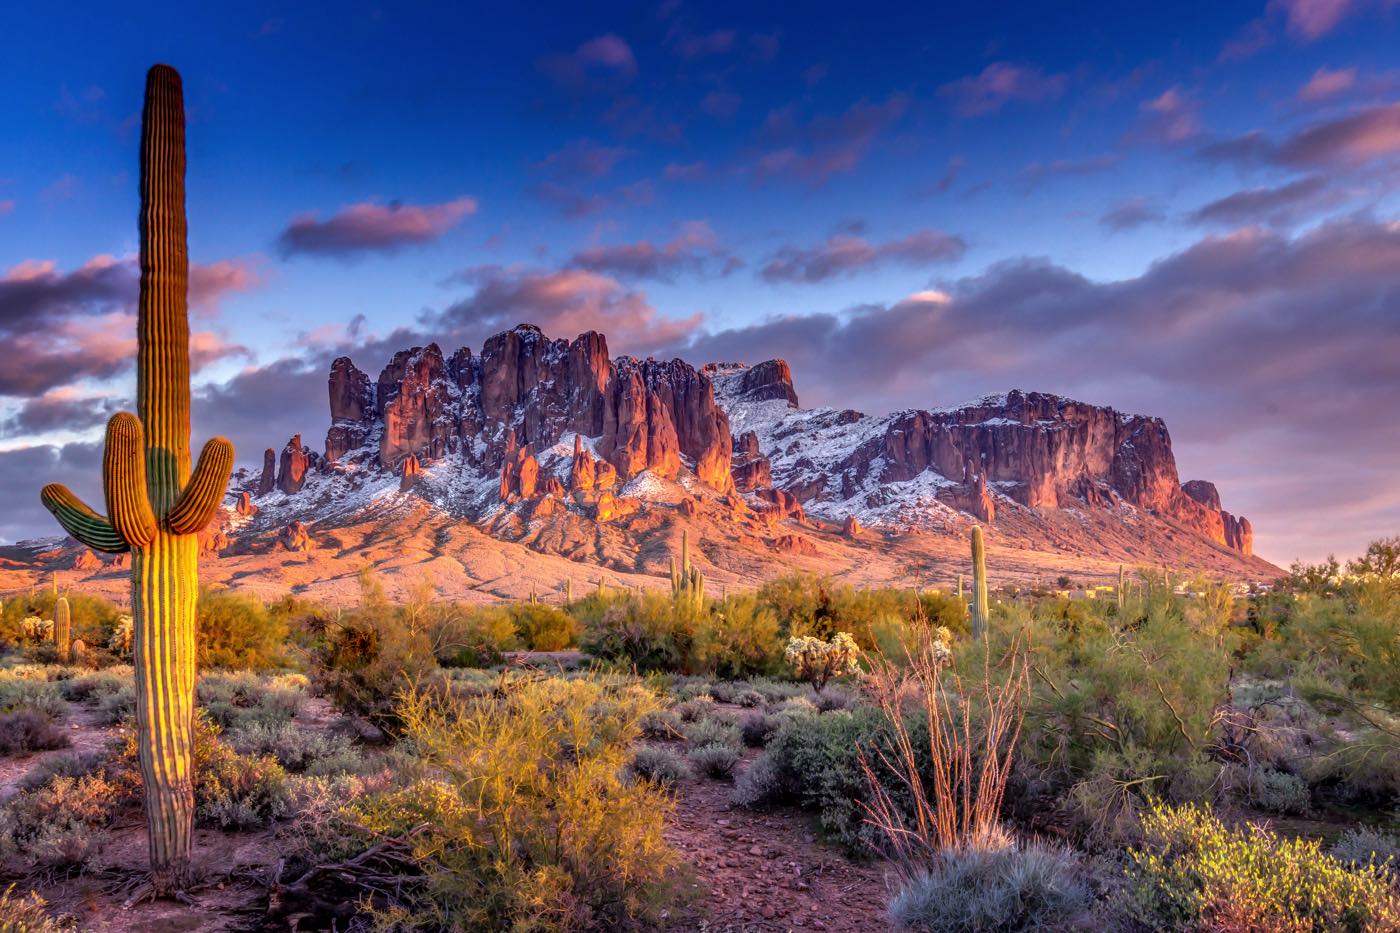 22 Best Things To Do in Arizona You Can’t Miss